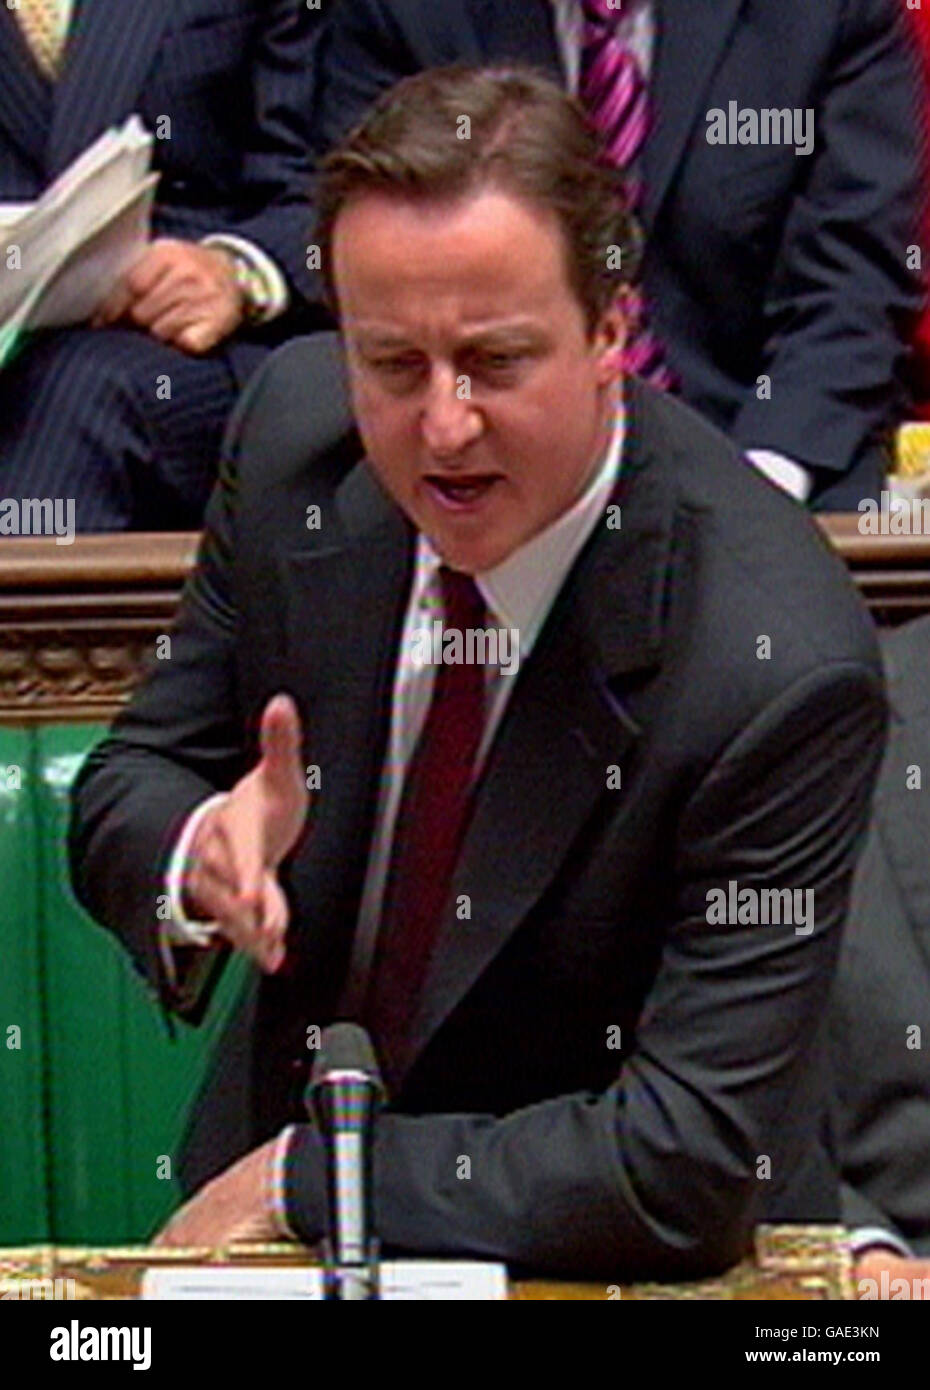 Leader of the Opposition David Cameron during Prime Minister's Questions in the House of Commons, London. Stock Photo